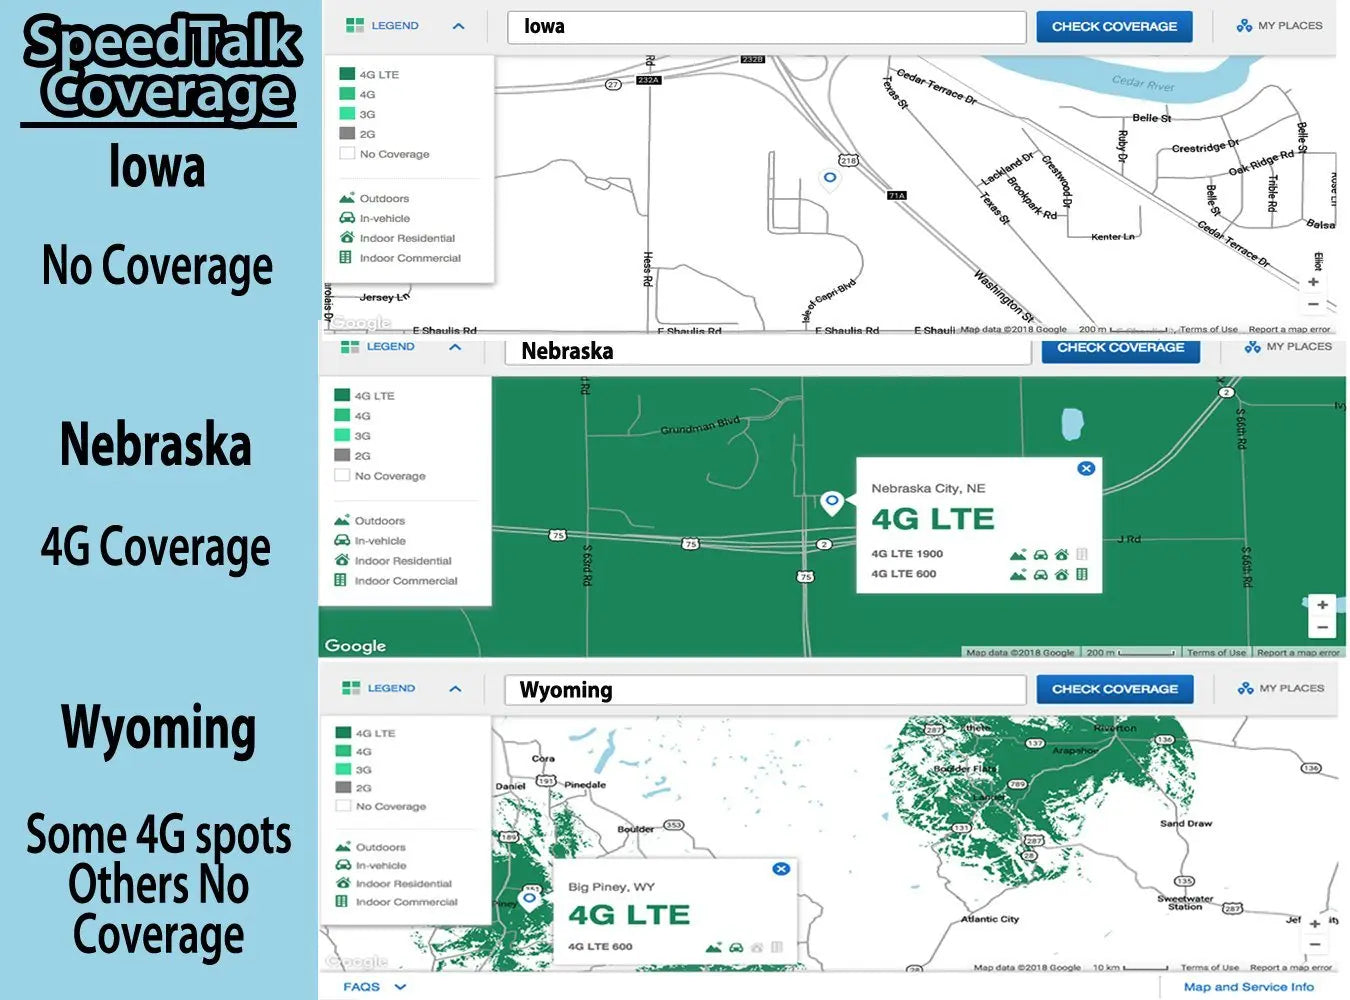 End of an Era: 2G Network Phased Out in Nebraska, Iowa, and Wyoming